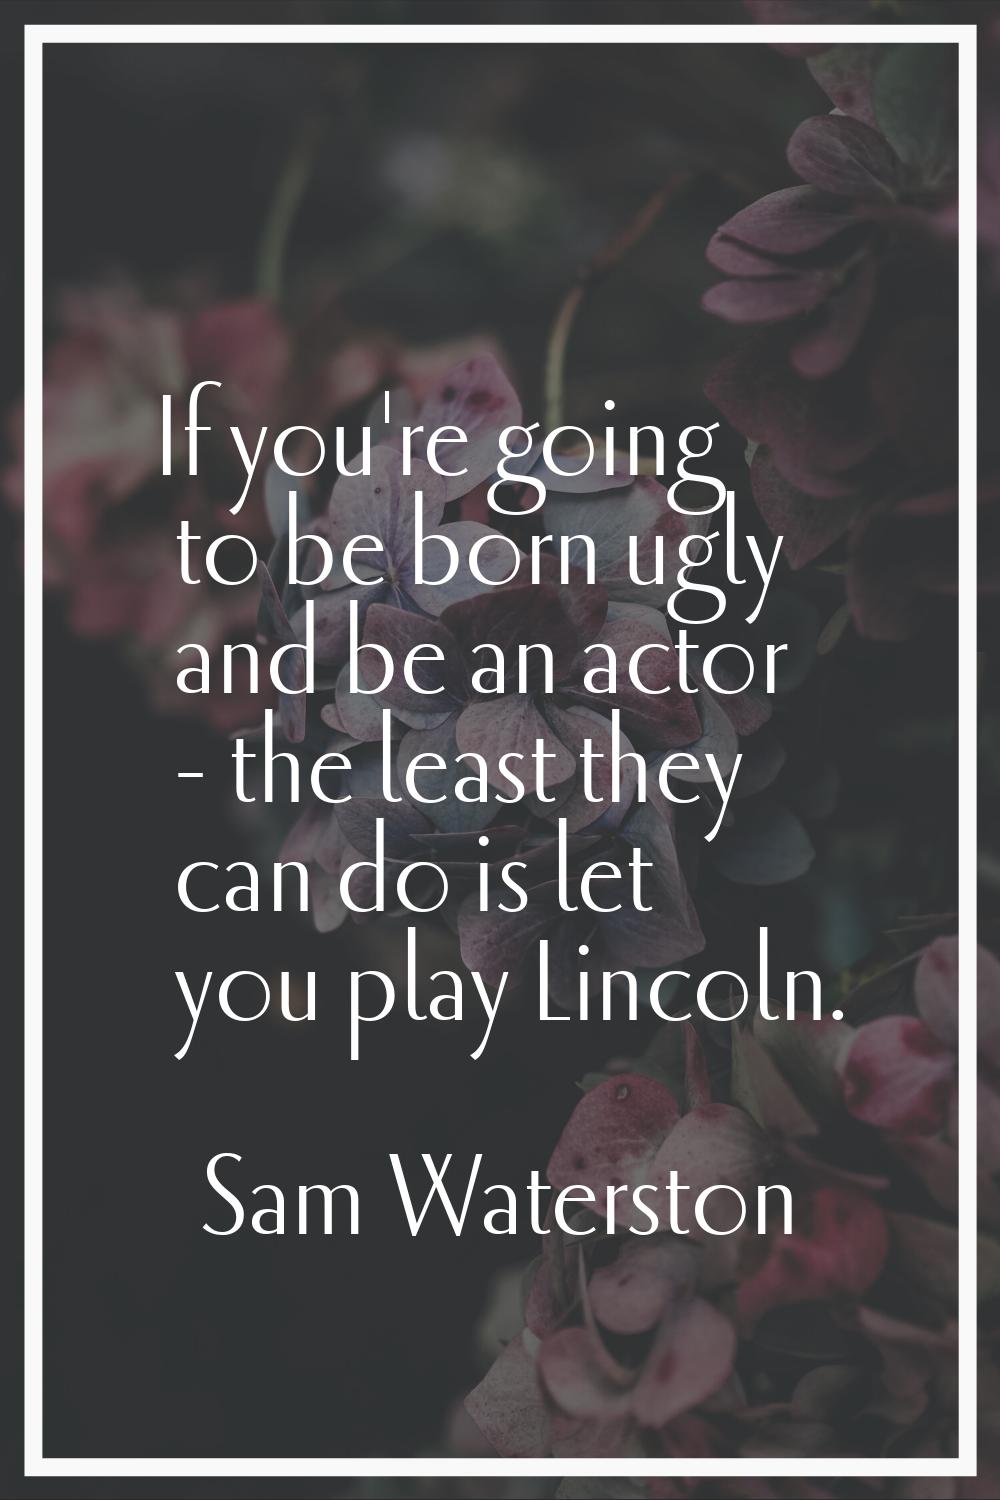 If you're going to be born ugly and be an actor - the least they can do is let you play Lincoln.